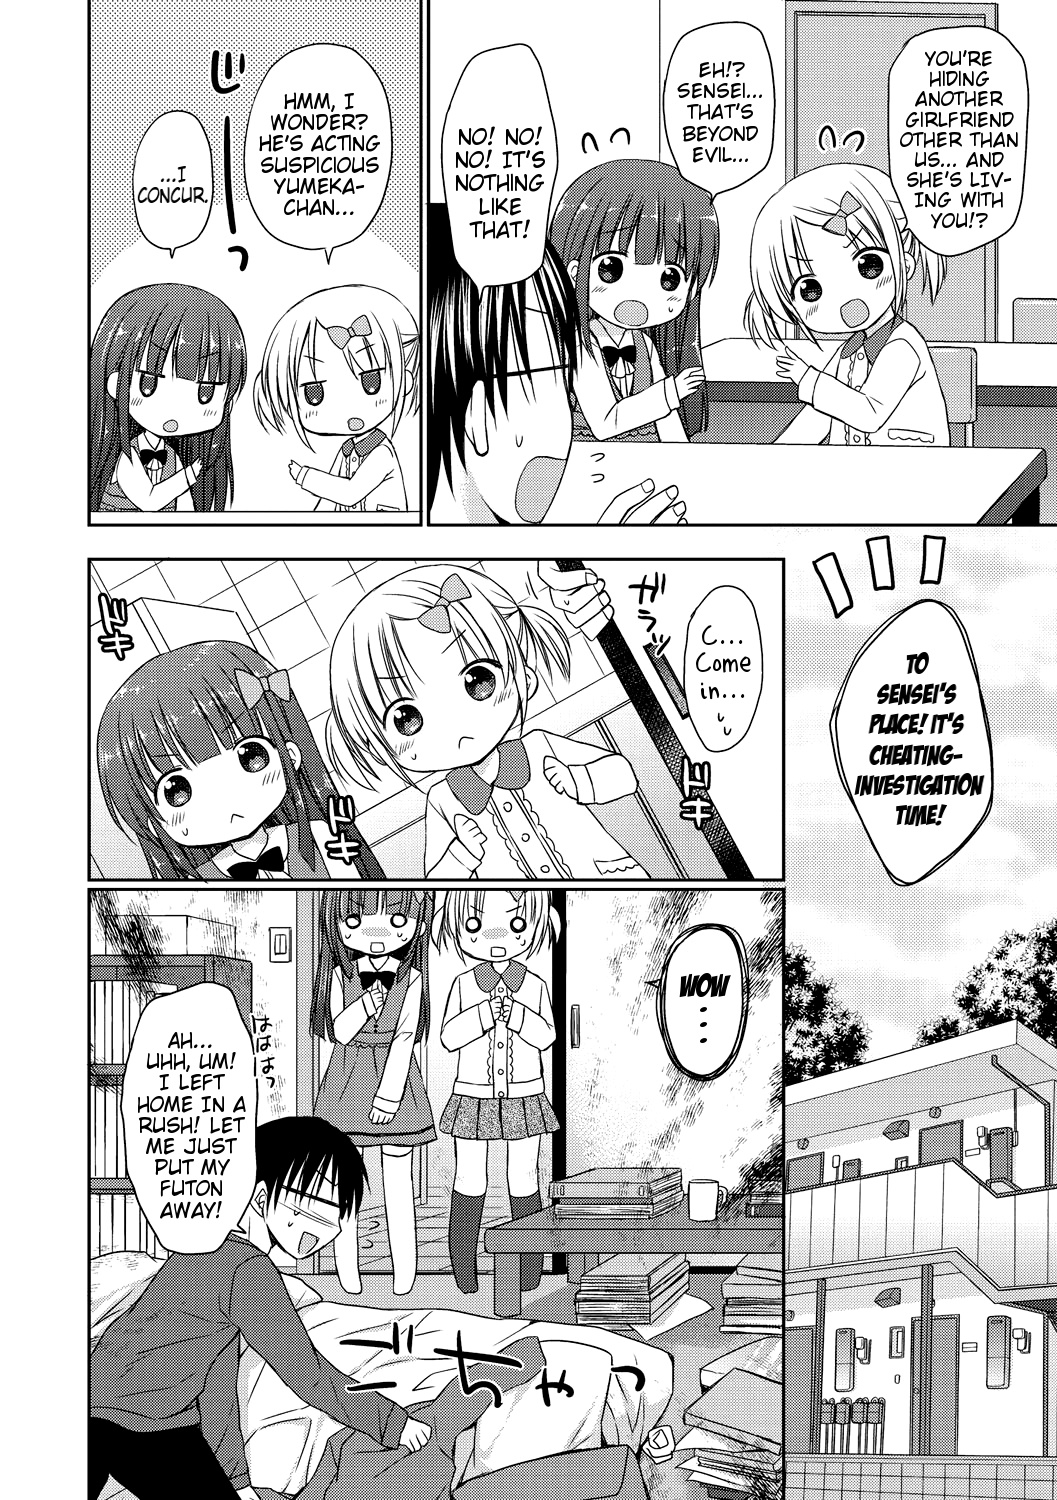 Yoiko To Ikenai Houkago Vol.1 Chapter 2: Love Love Lesson ~Only Look At Us~ - Picture 2